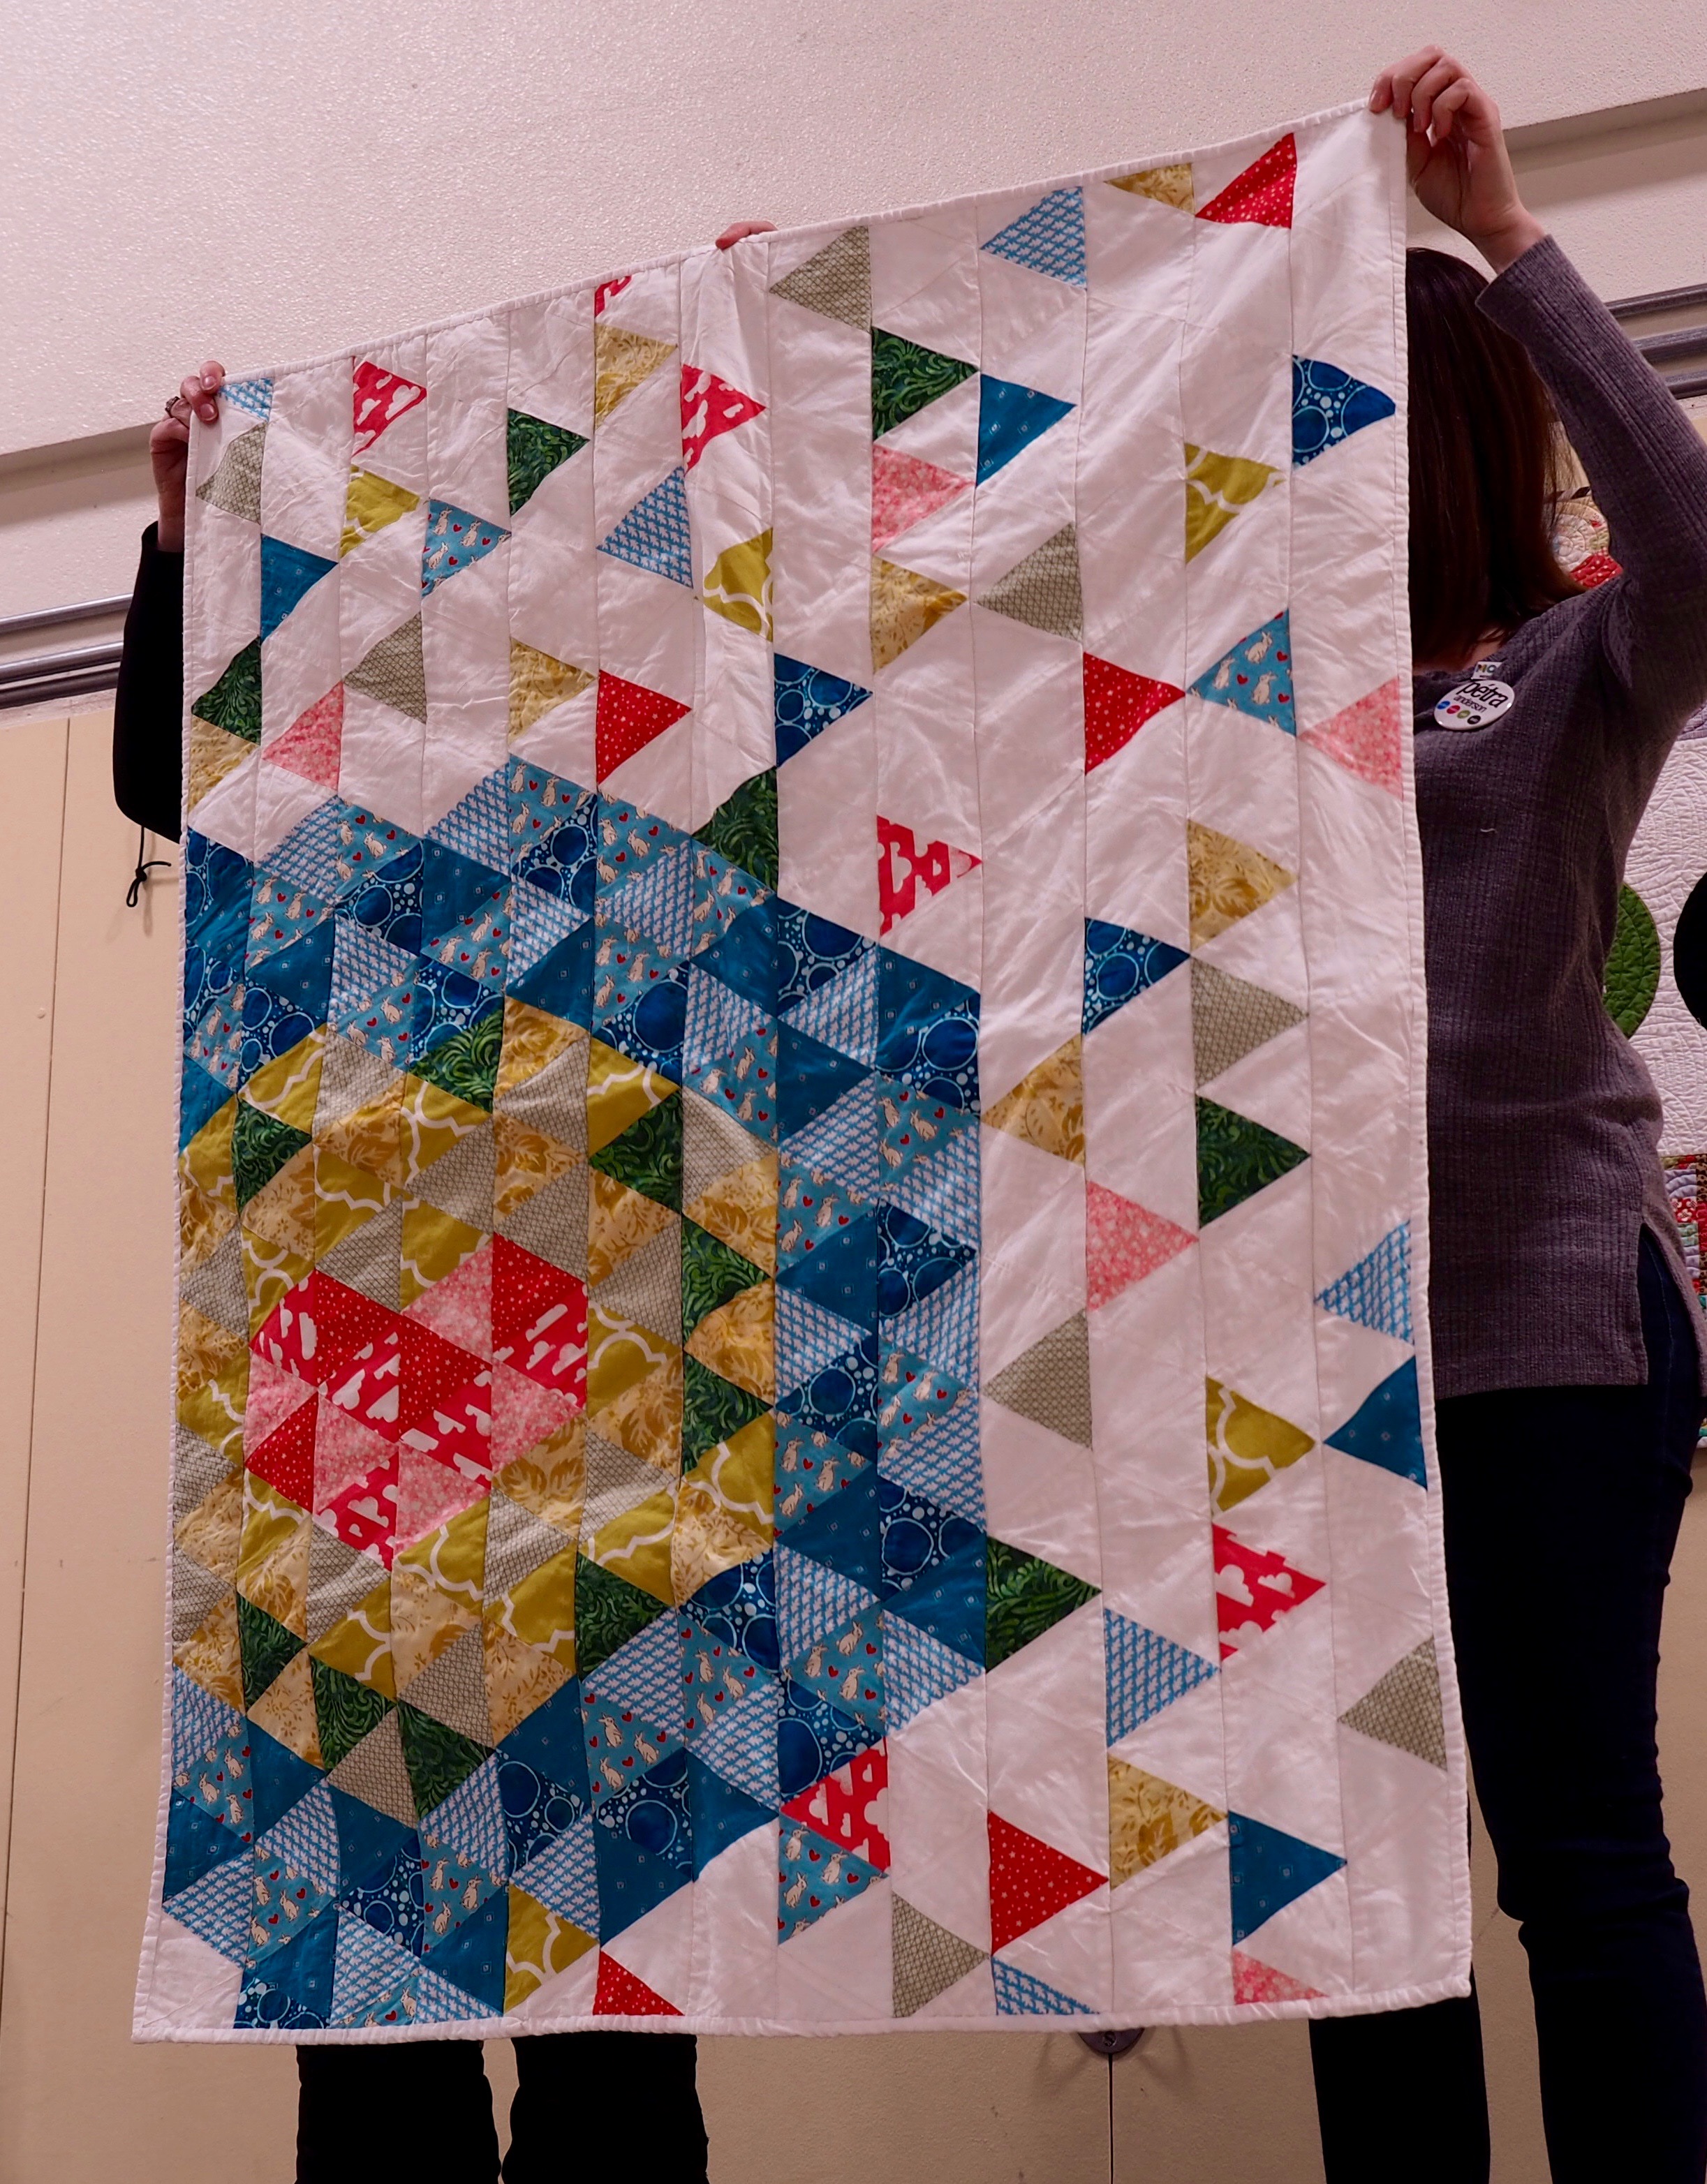 Quilt pattern by Sunshine Handcrafts (triangles) quilt by Maddison Stapleton